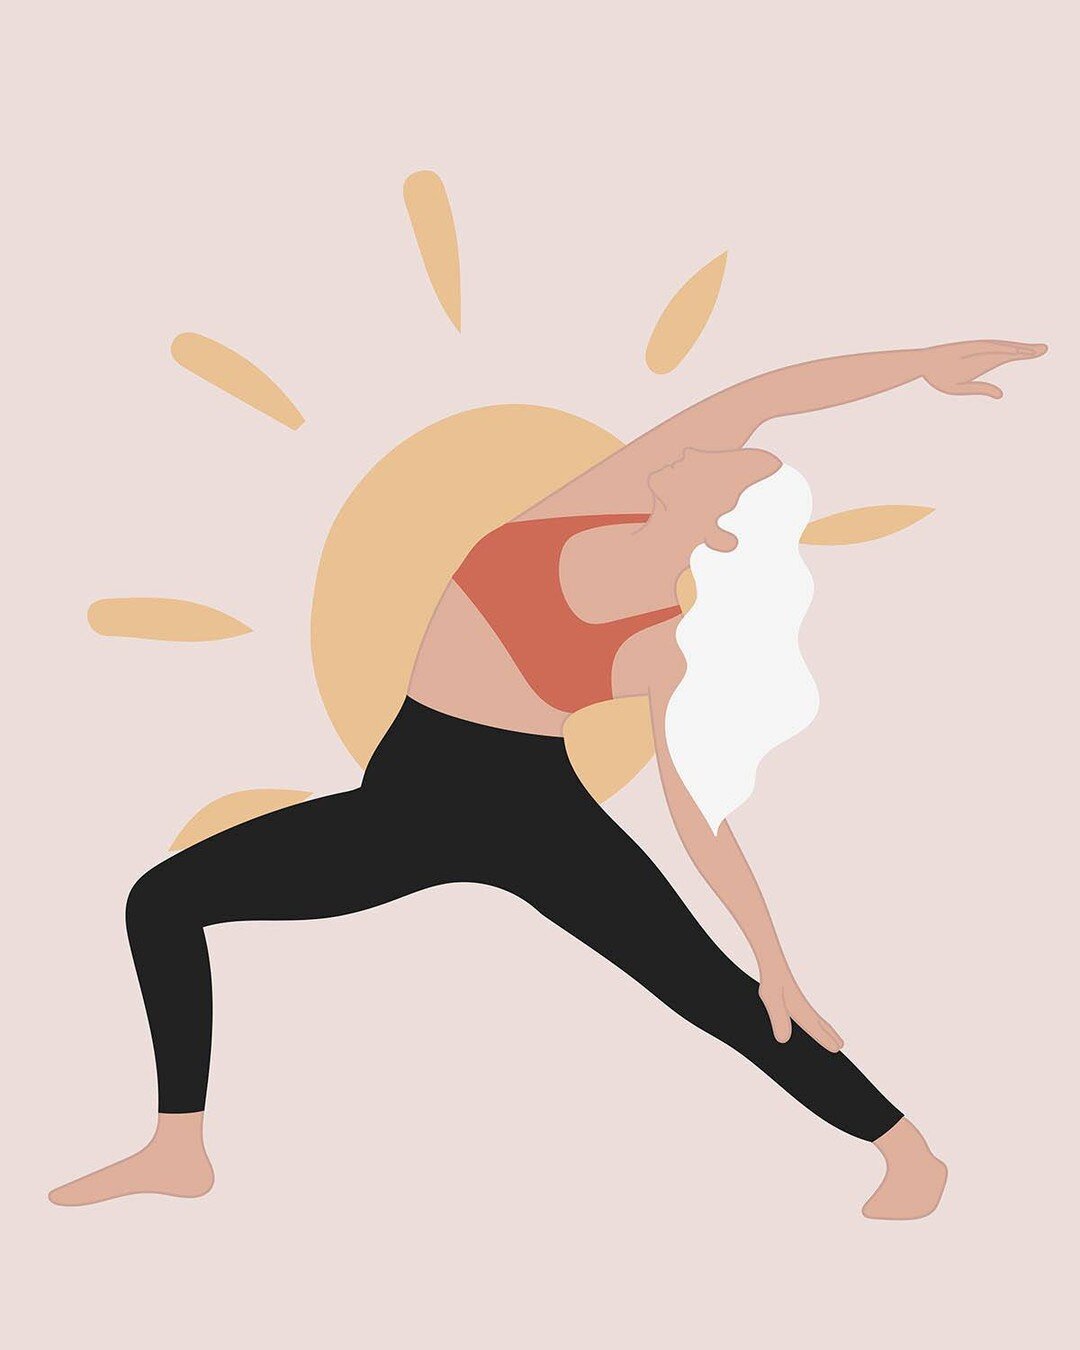 Let Inspired Yoga and Inspired Stretch Stretch the stress right out of your body with healing postures. 🧘

https://www.welcomeom.space/welcome-home-classes

#justbreathe #anxietyrelief #releasetension #beginanywhere #SpiritBreath #breathe #welcomeom